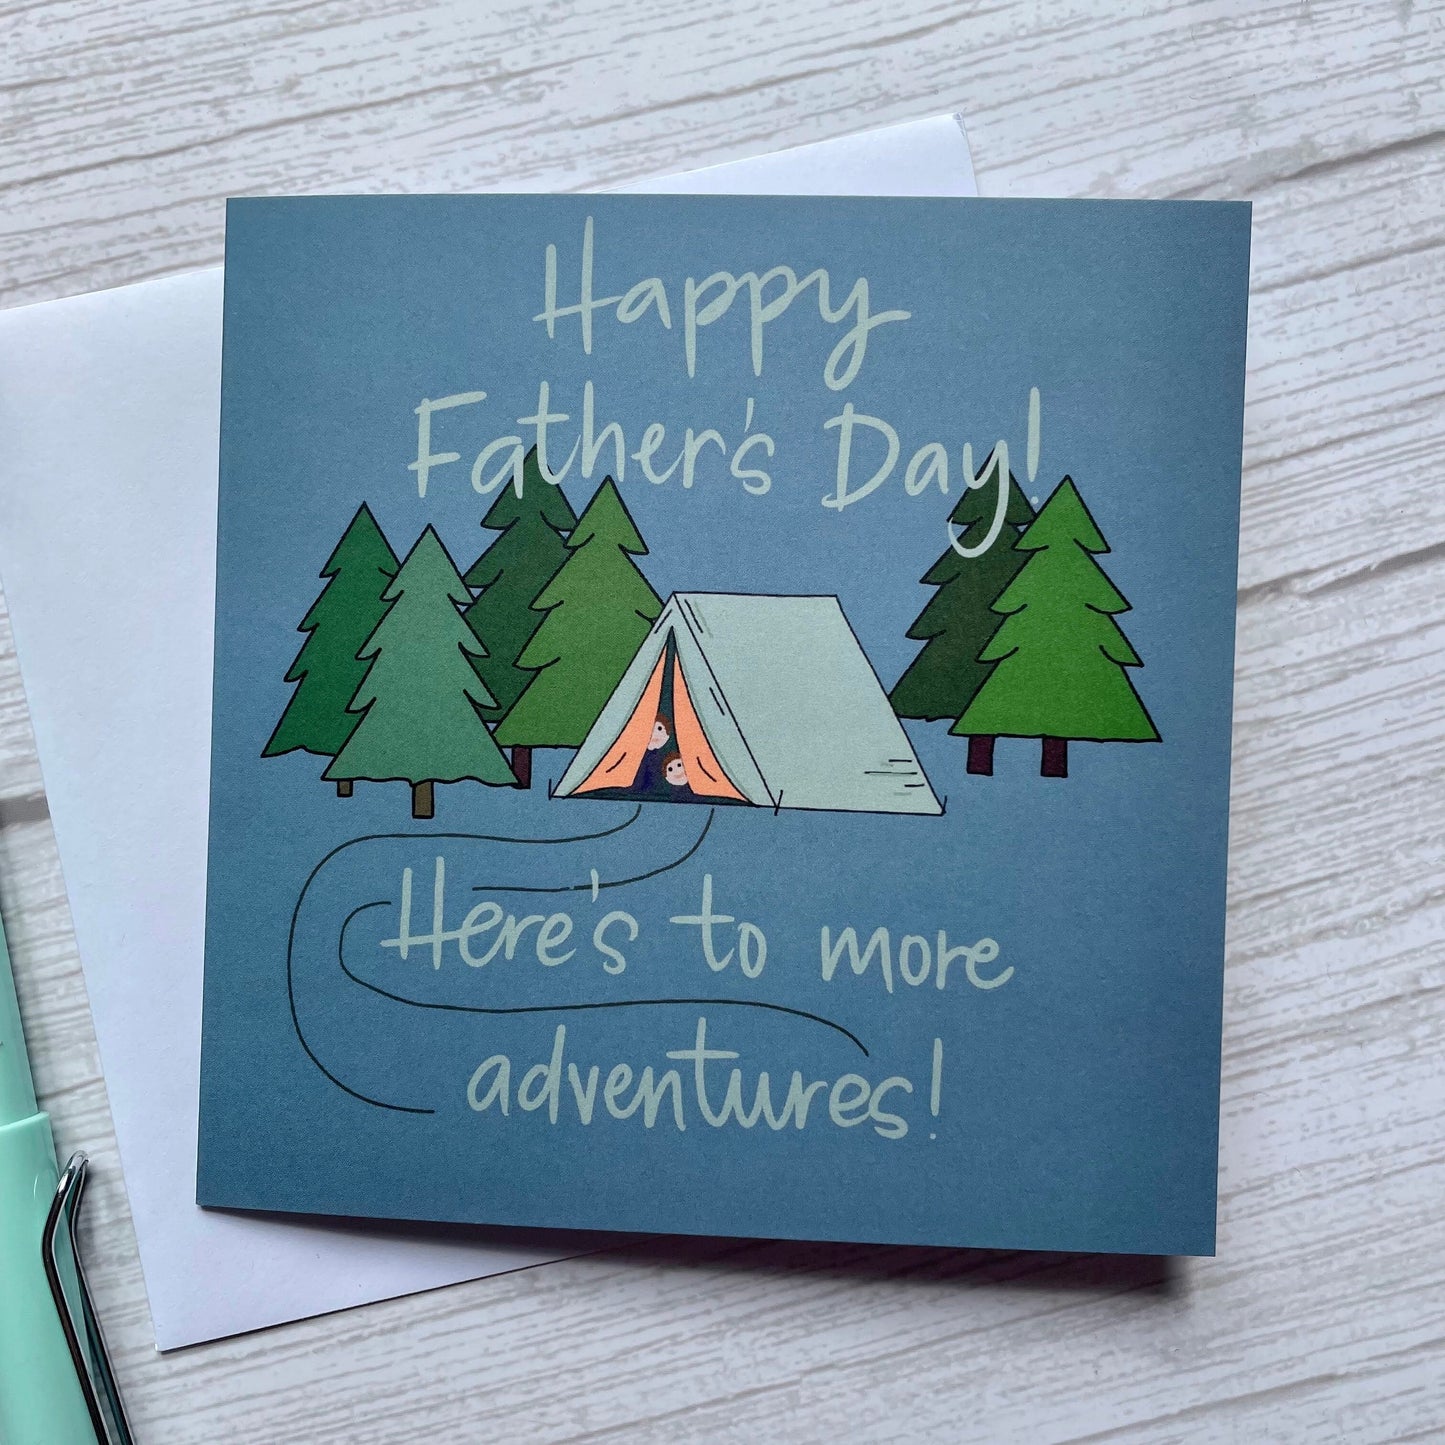 And Hope Designs Greeting & Note Cards Here’s to more adventures Father’s Day card